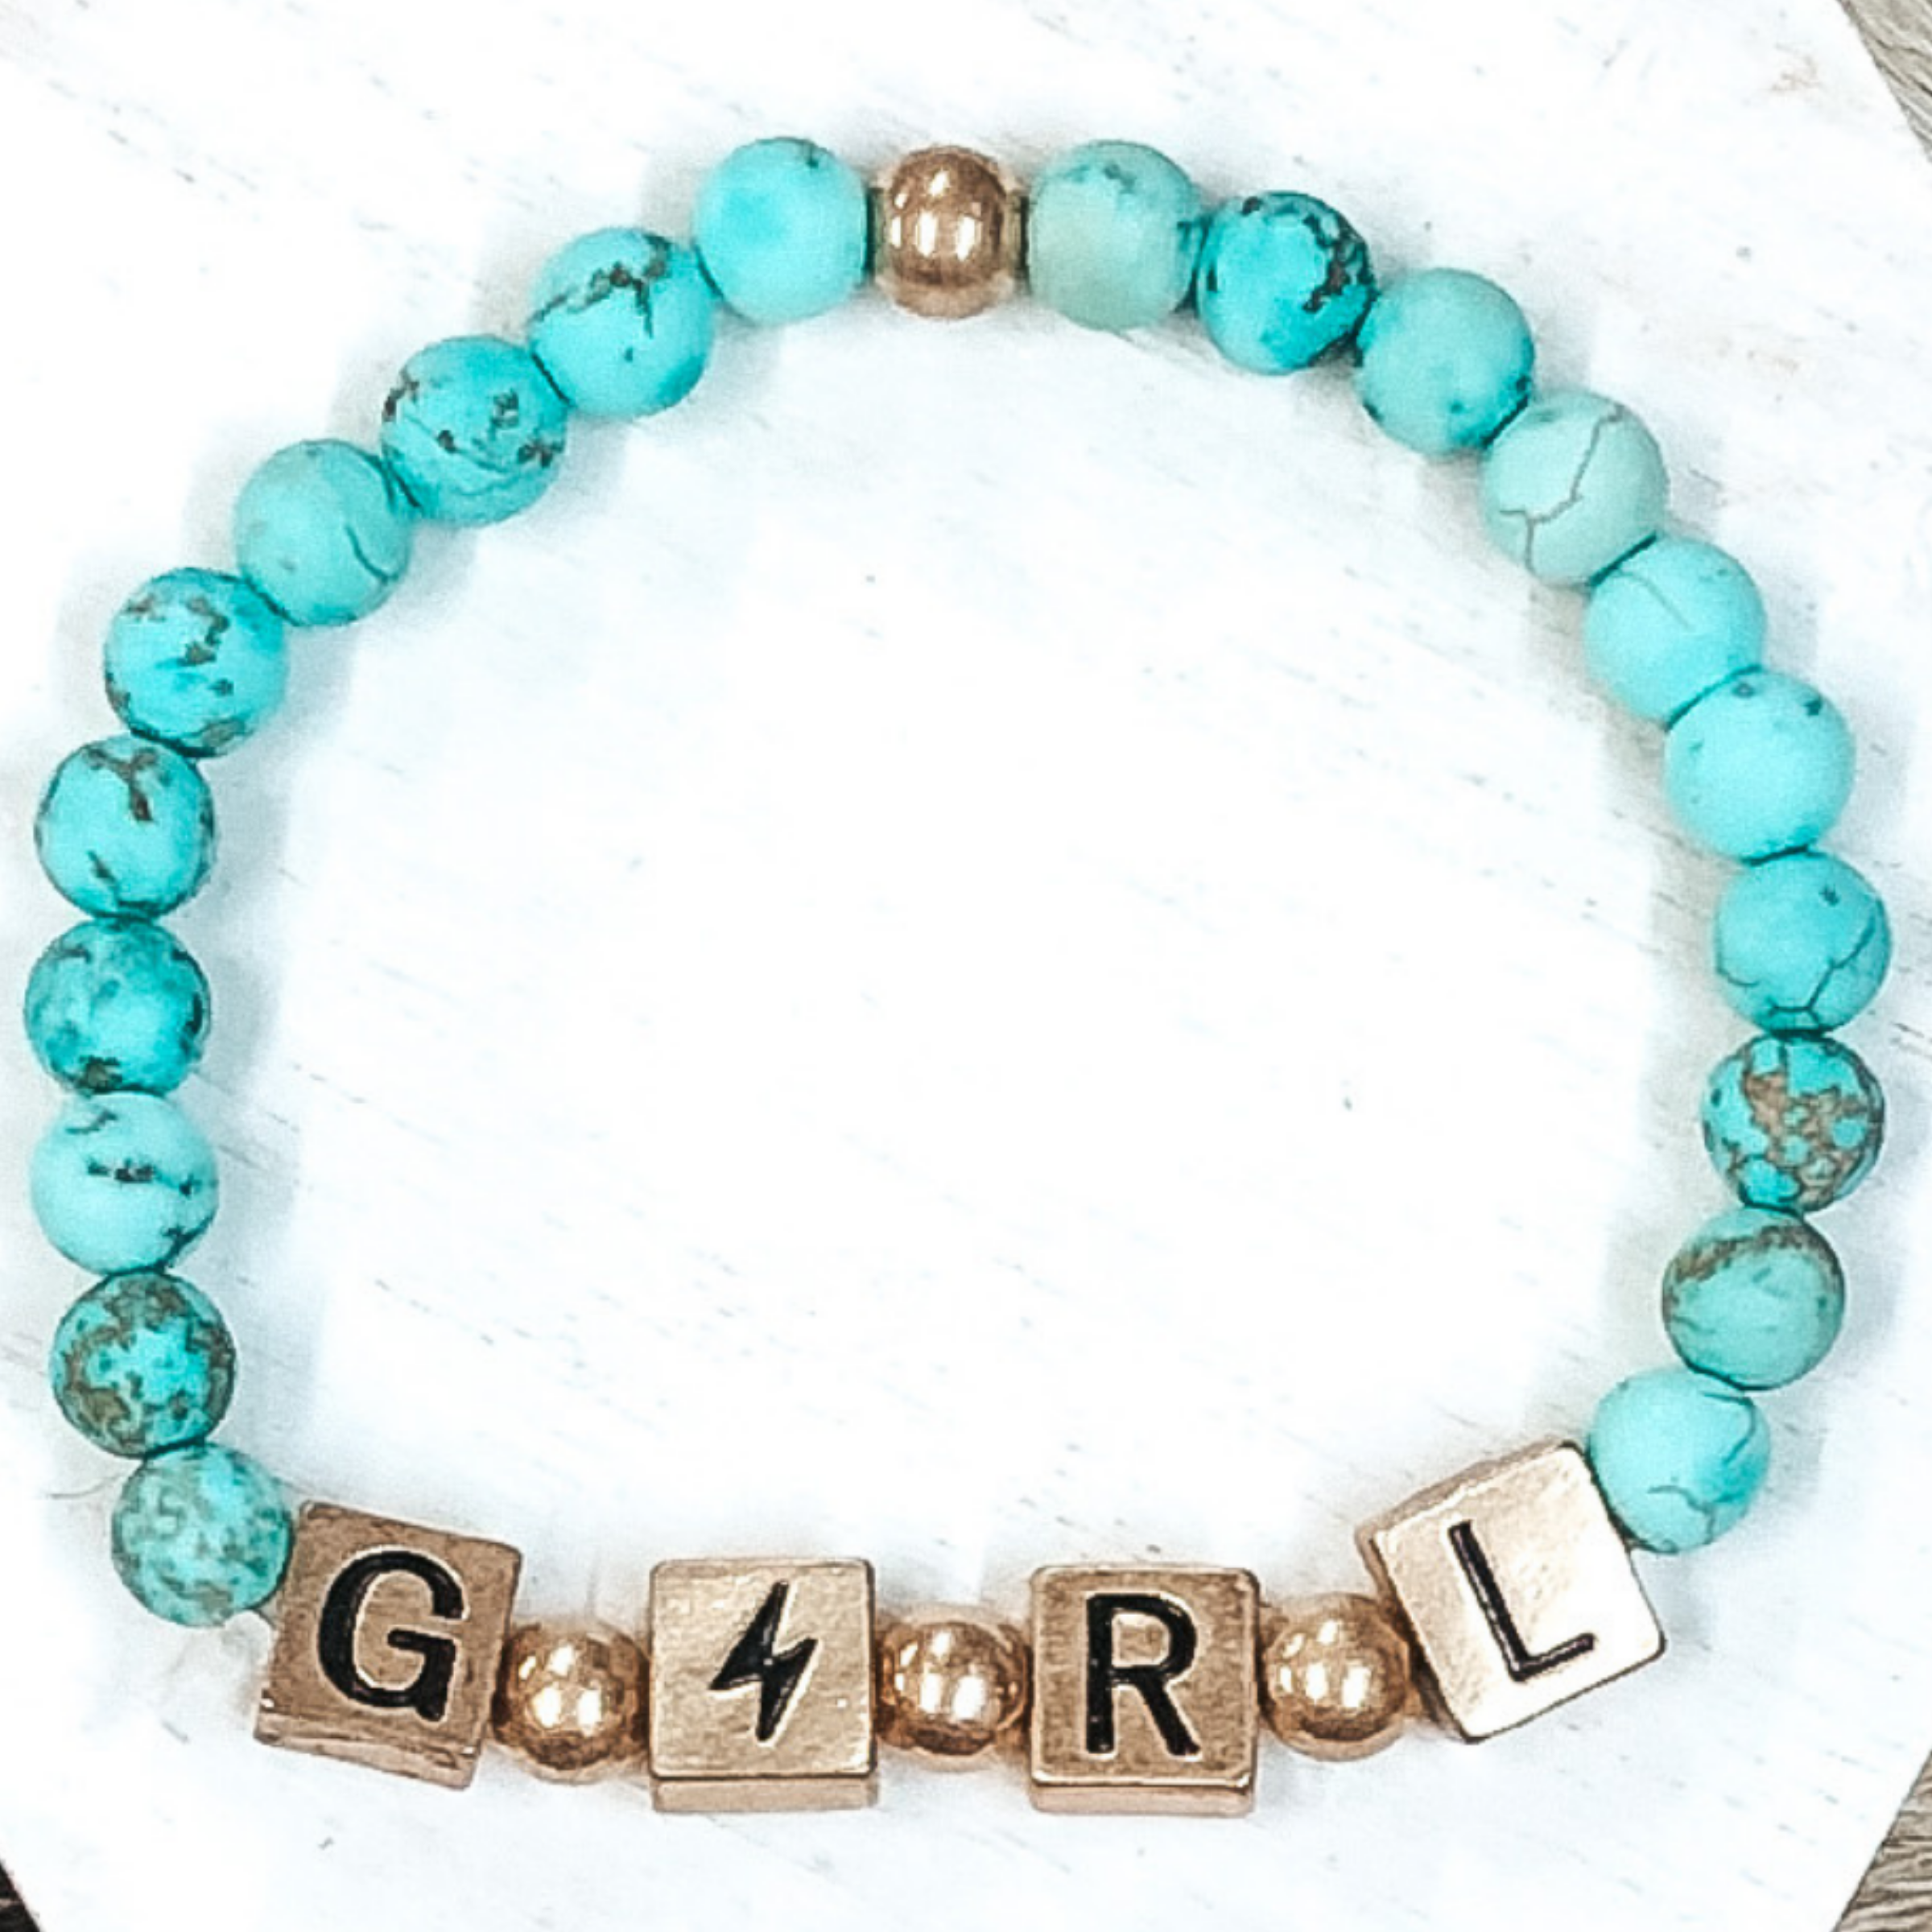 Girl Power Bracelet in Turquoise - Giddy Up Glamour Boutique